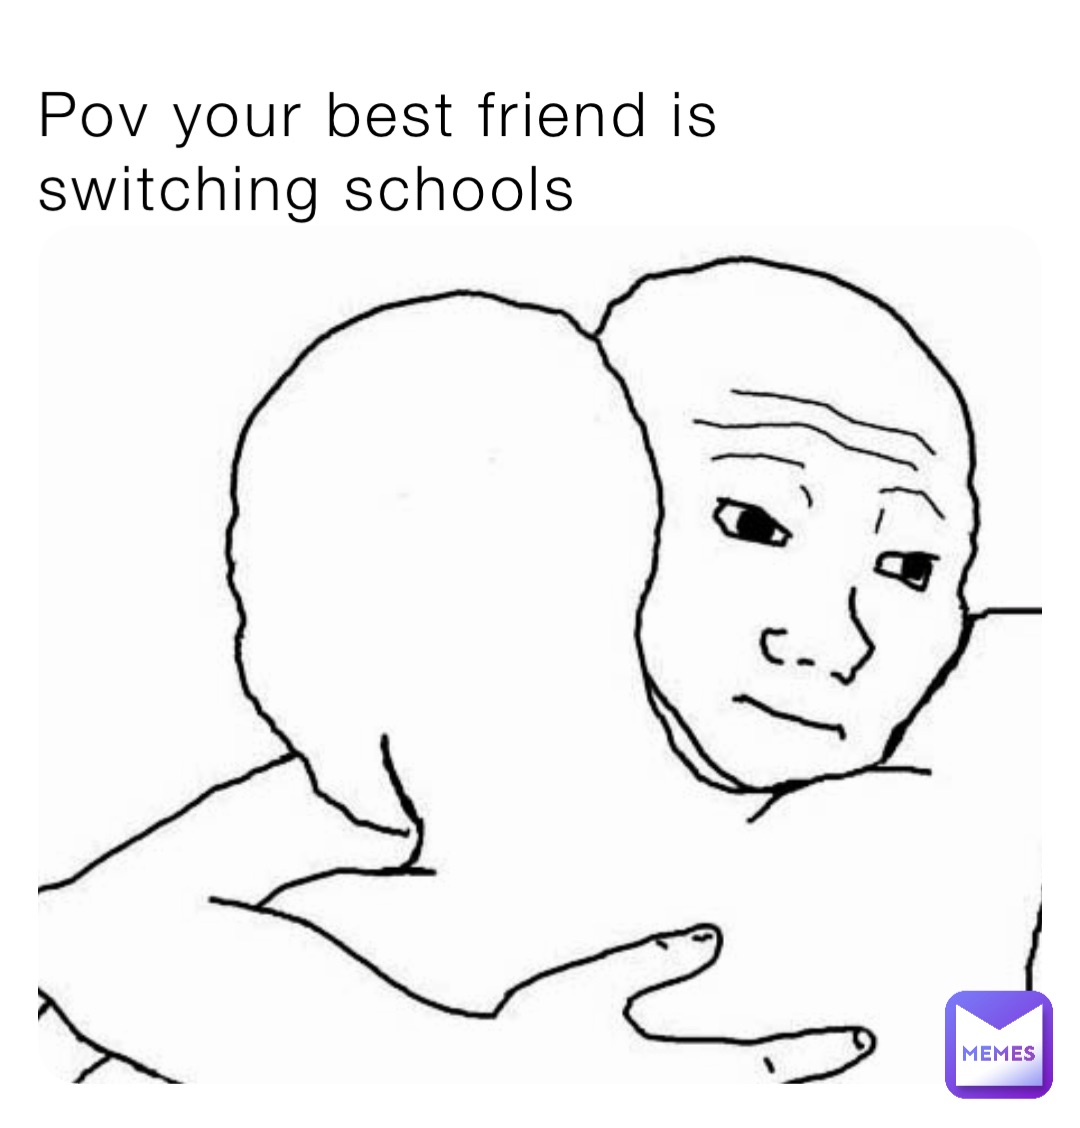 Pov your best friend is switching schools